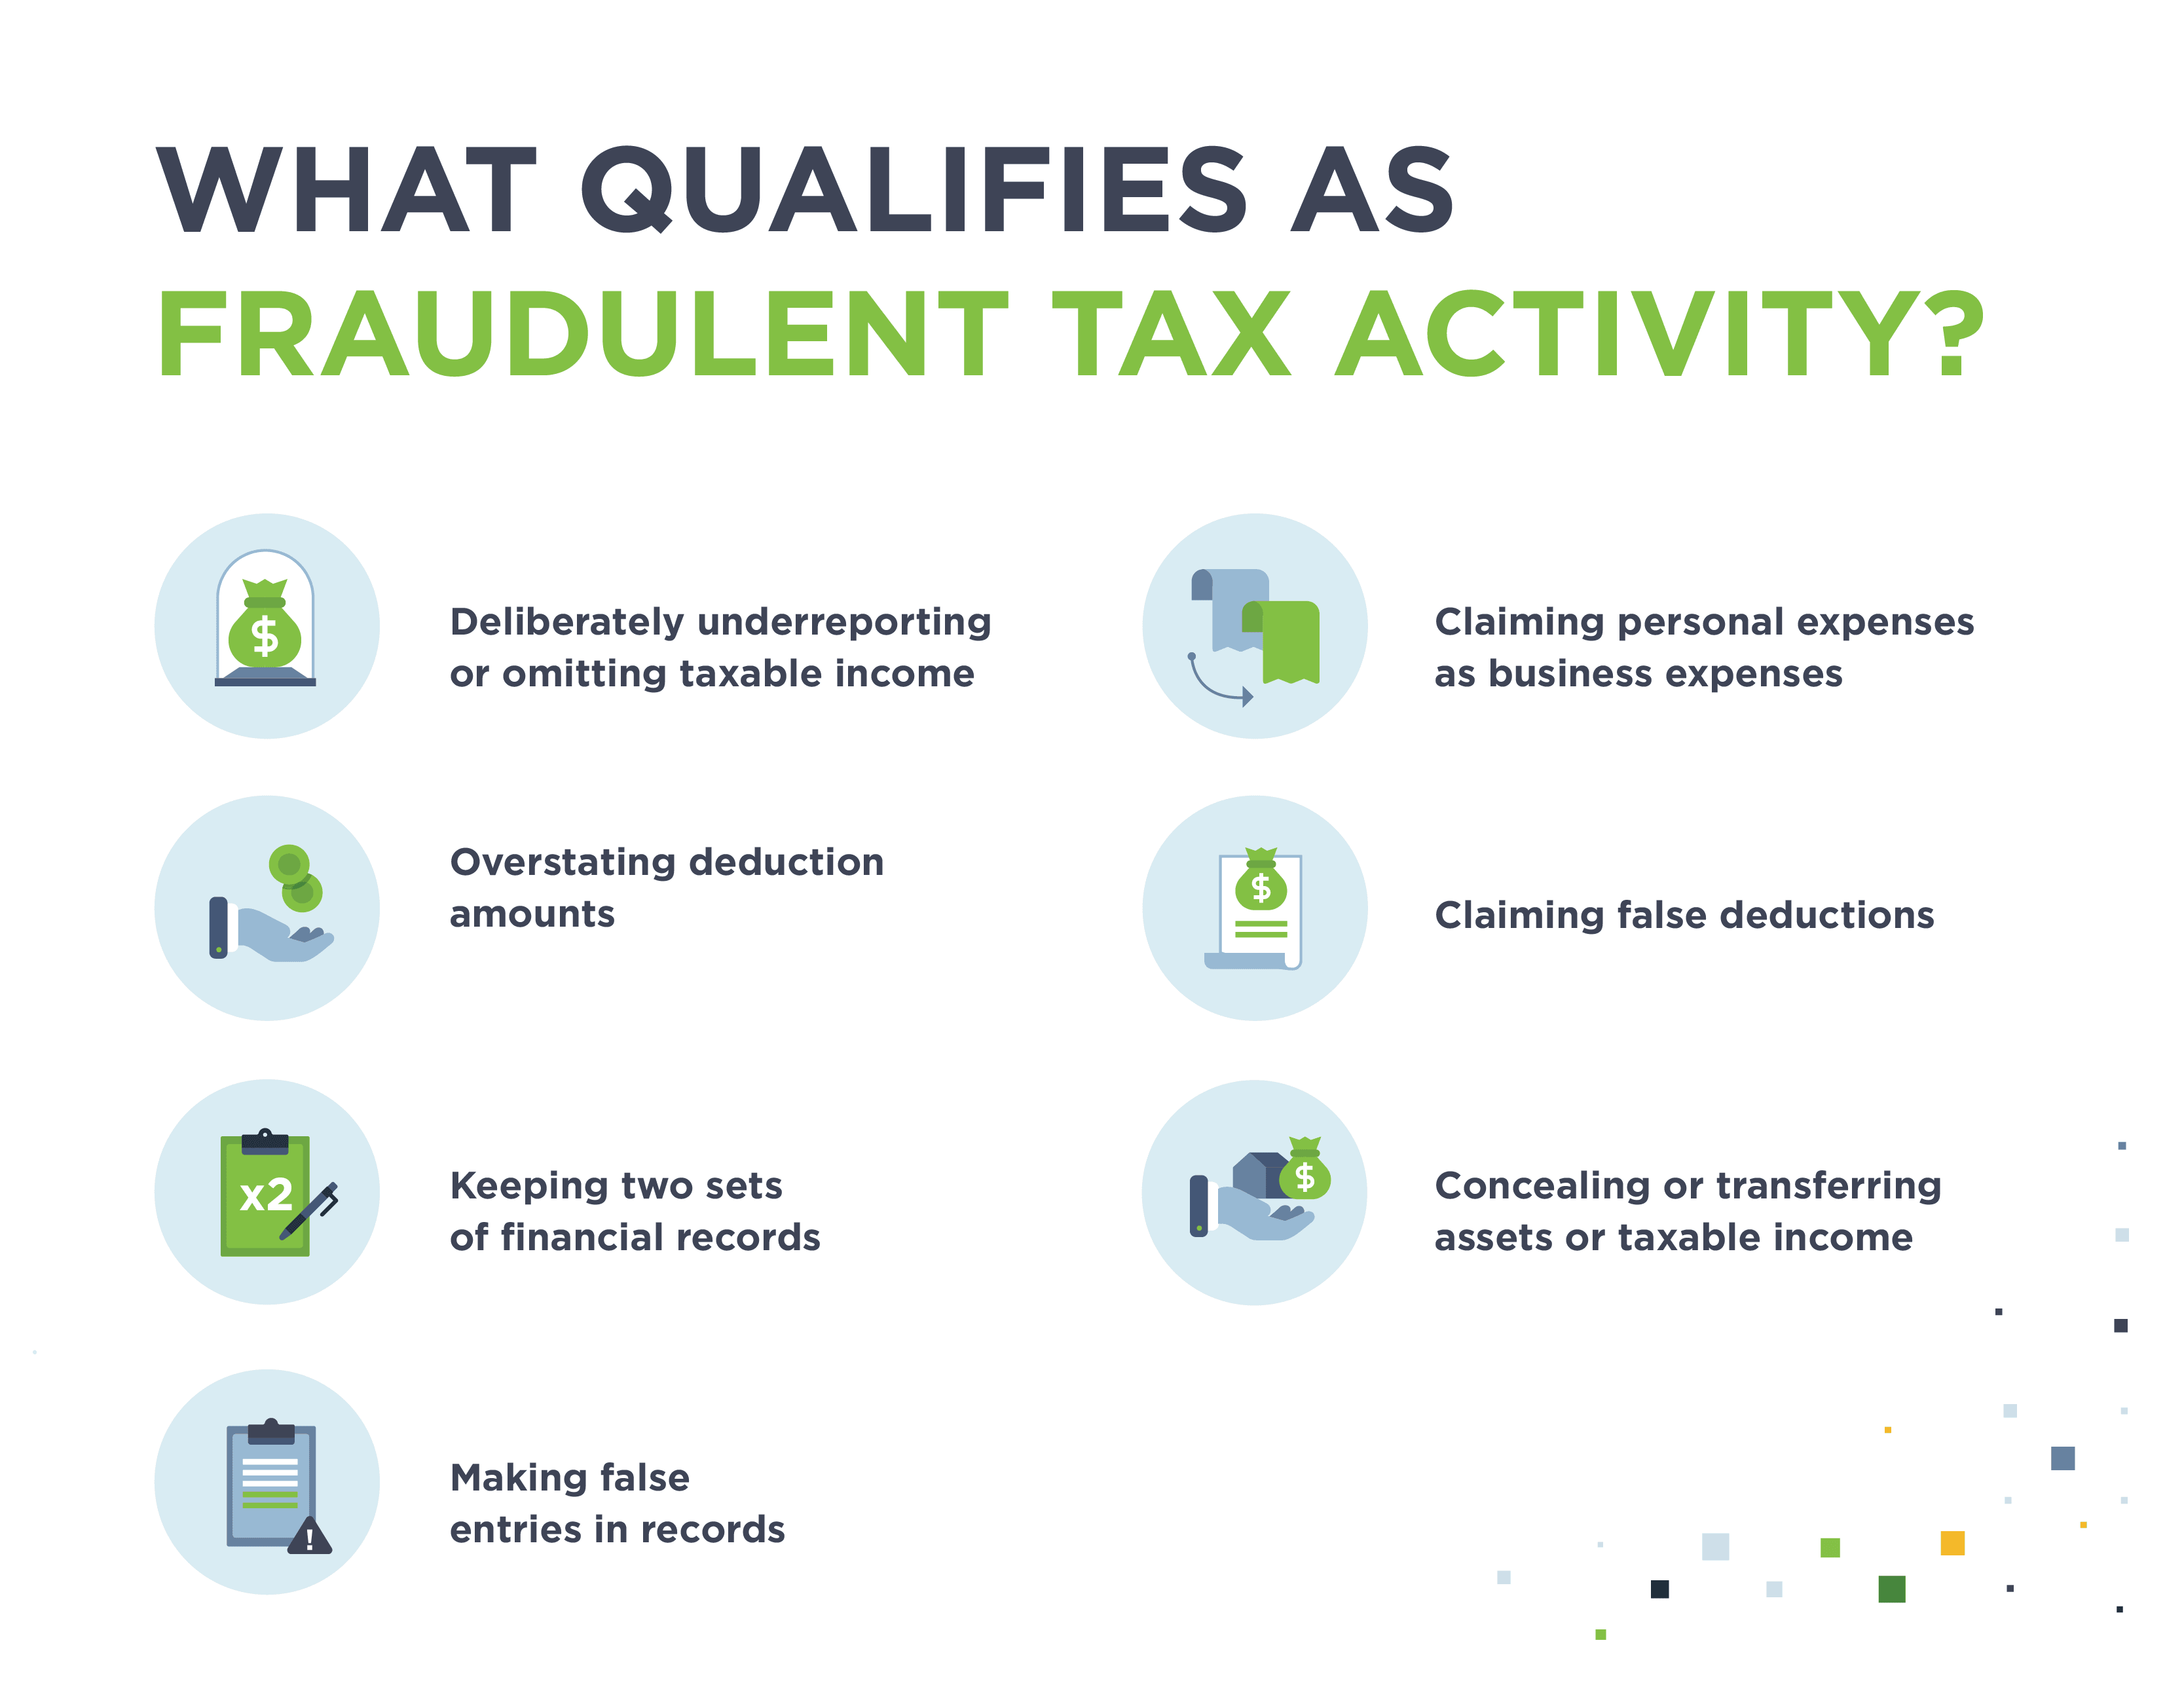 List of things that qualify as fraudulent tax activity.